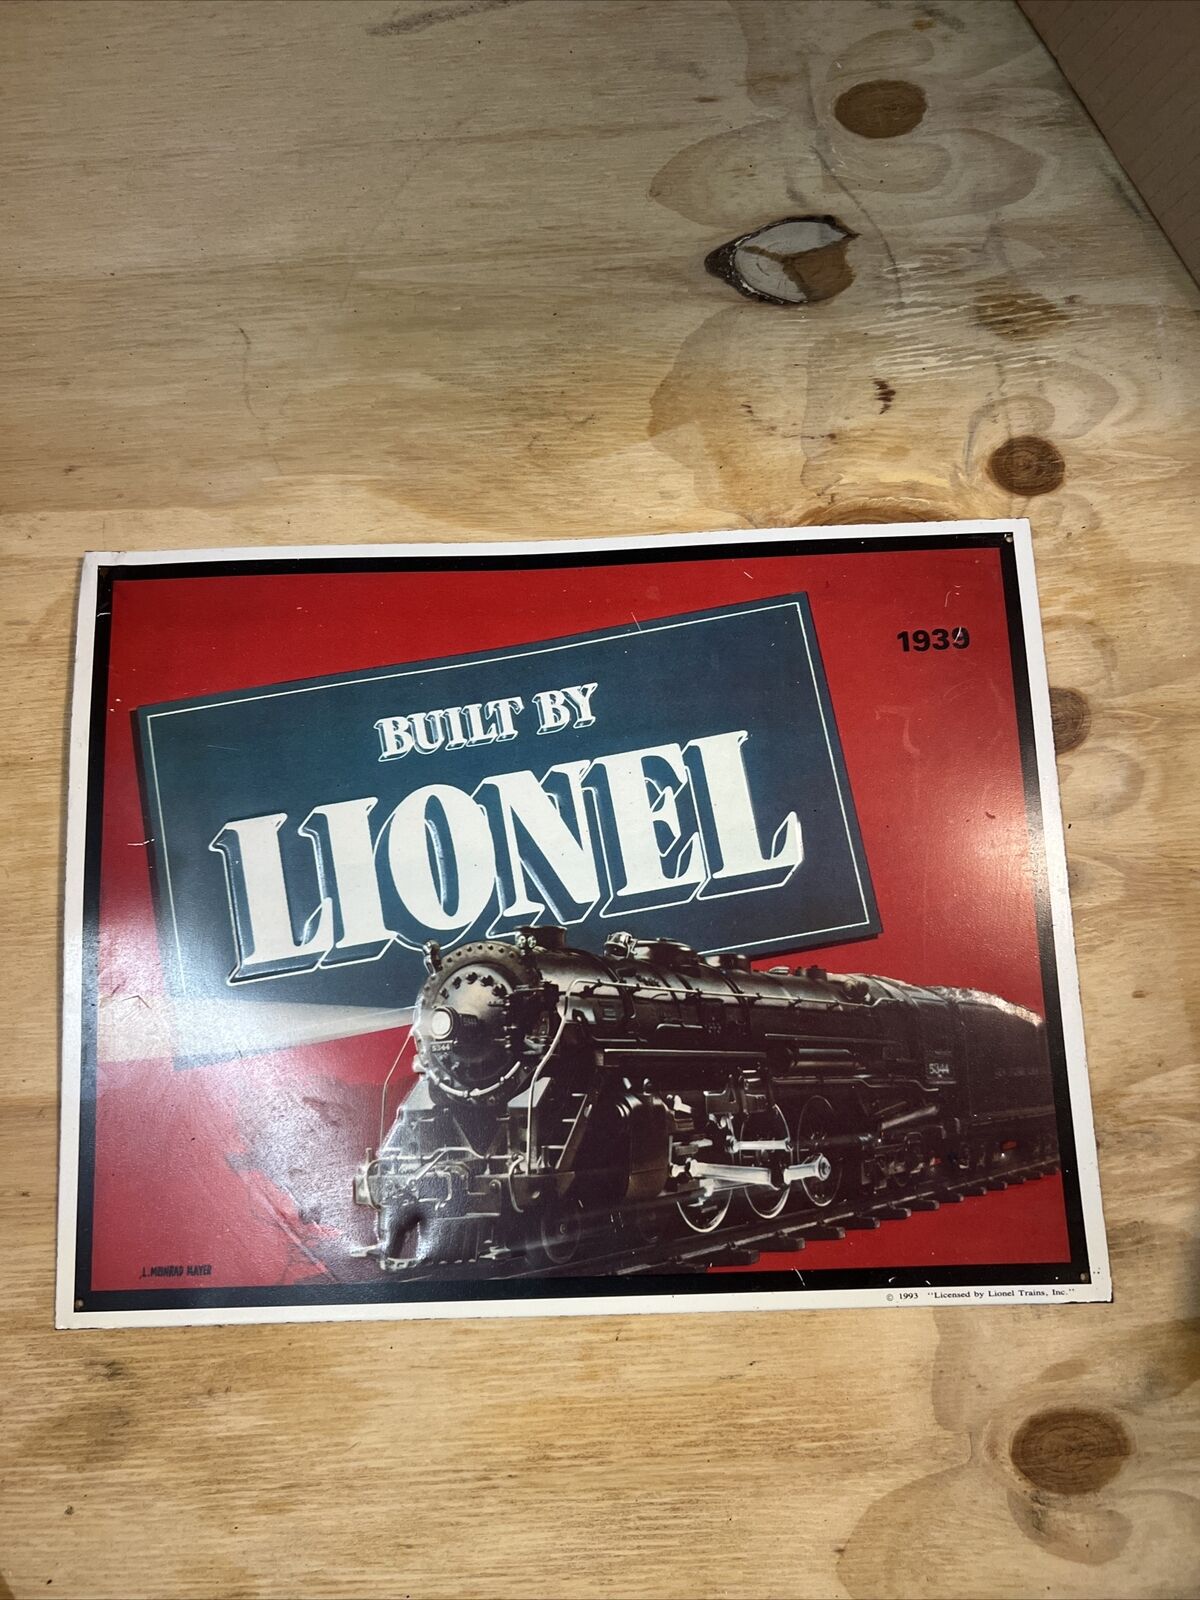 Built by Lionel Trains Tin Metal Sign Vintage Ad repro of 1939 catalog 15x11.75\